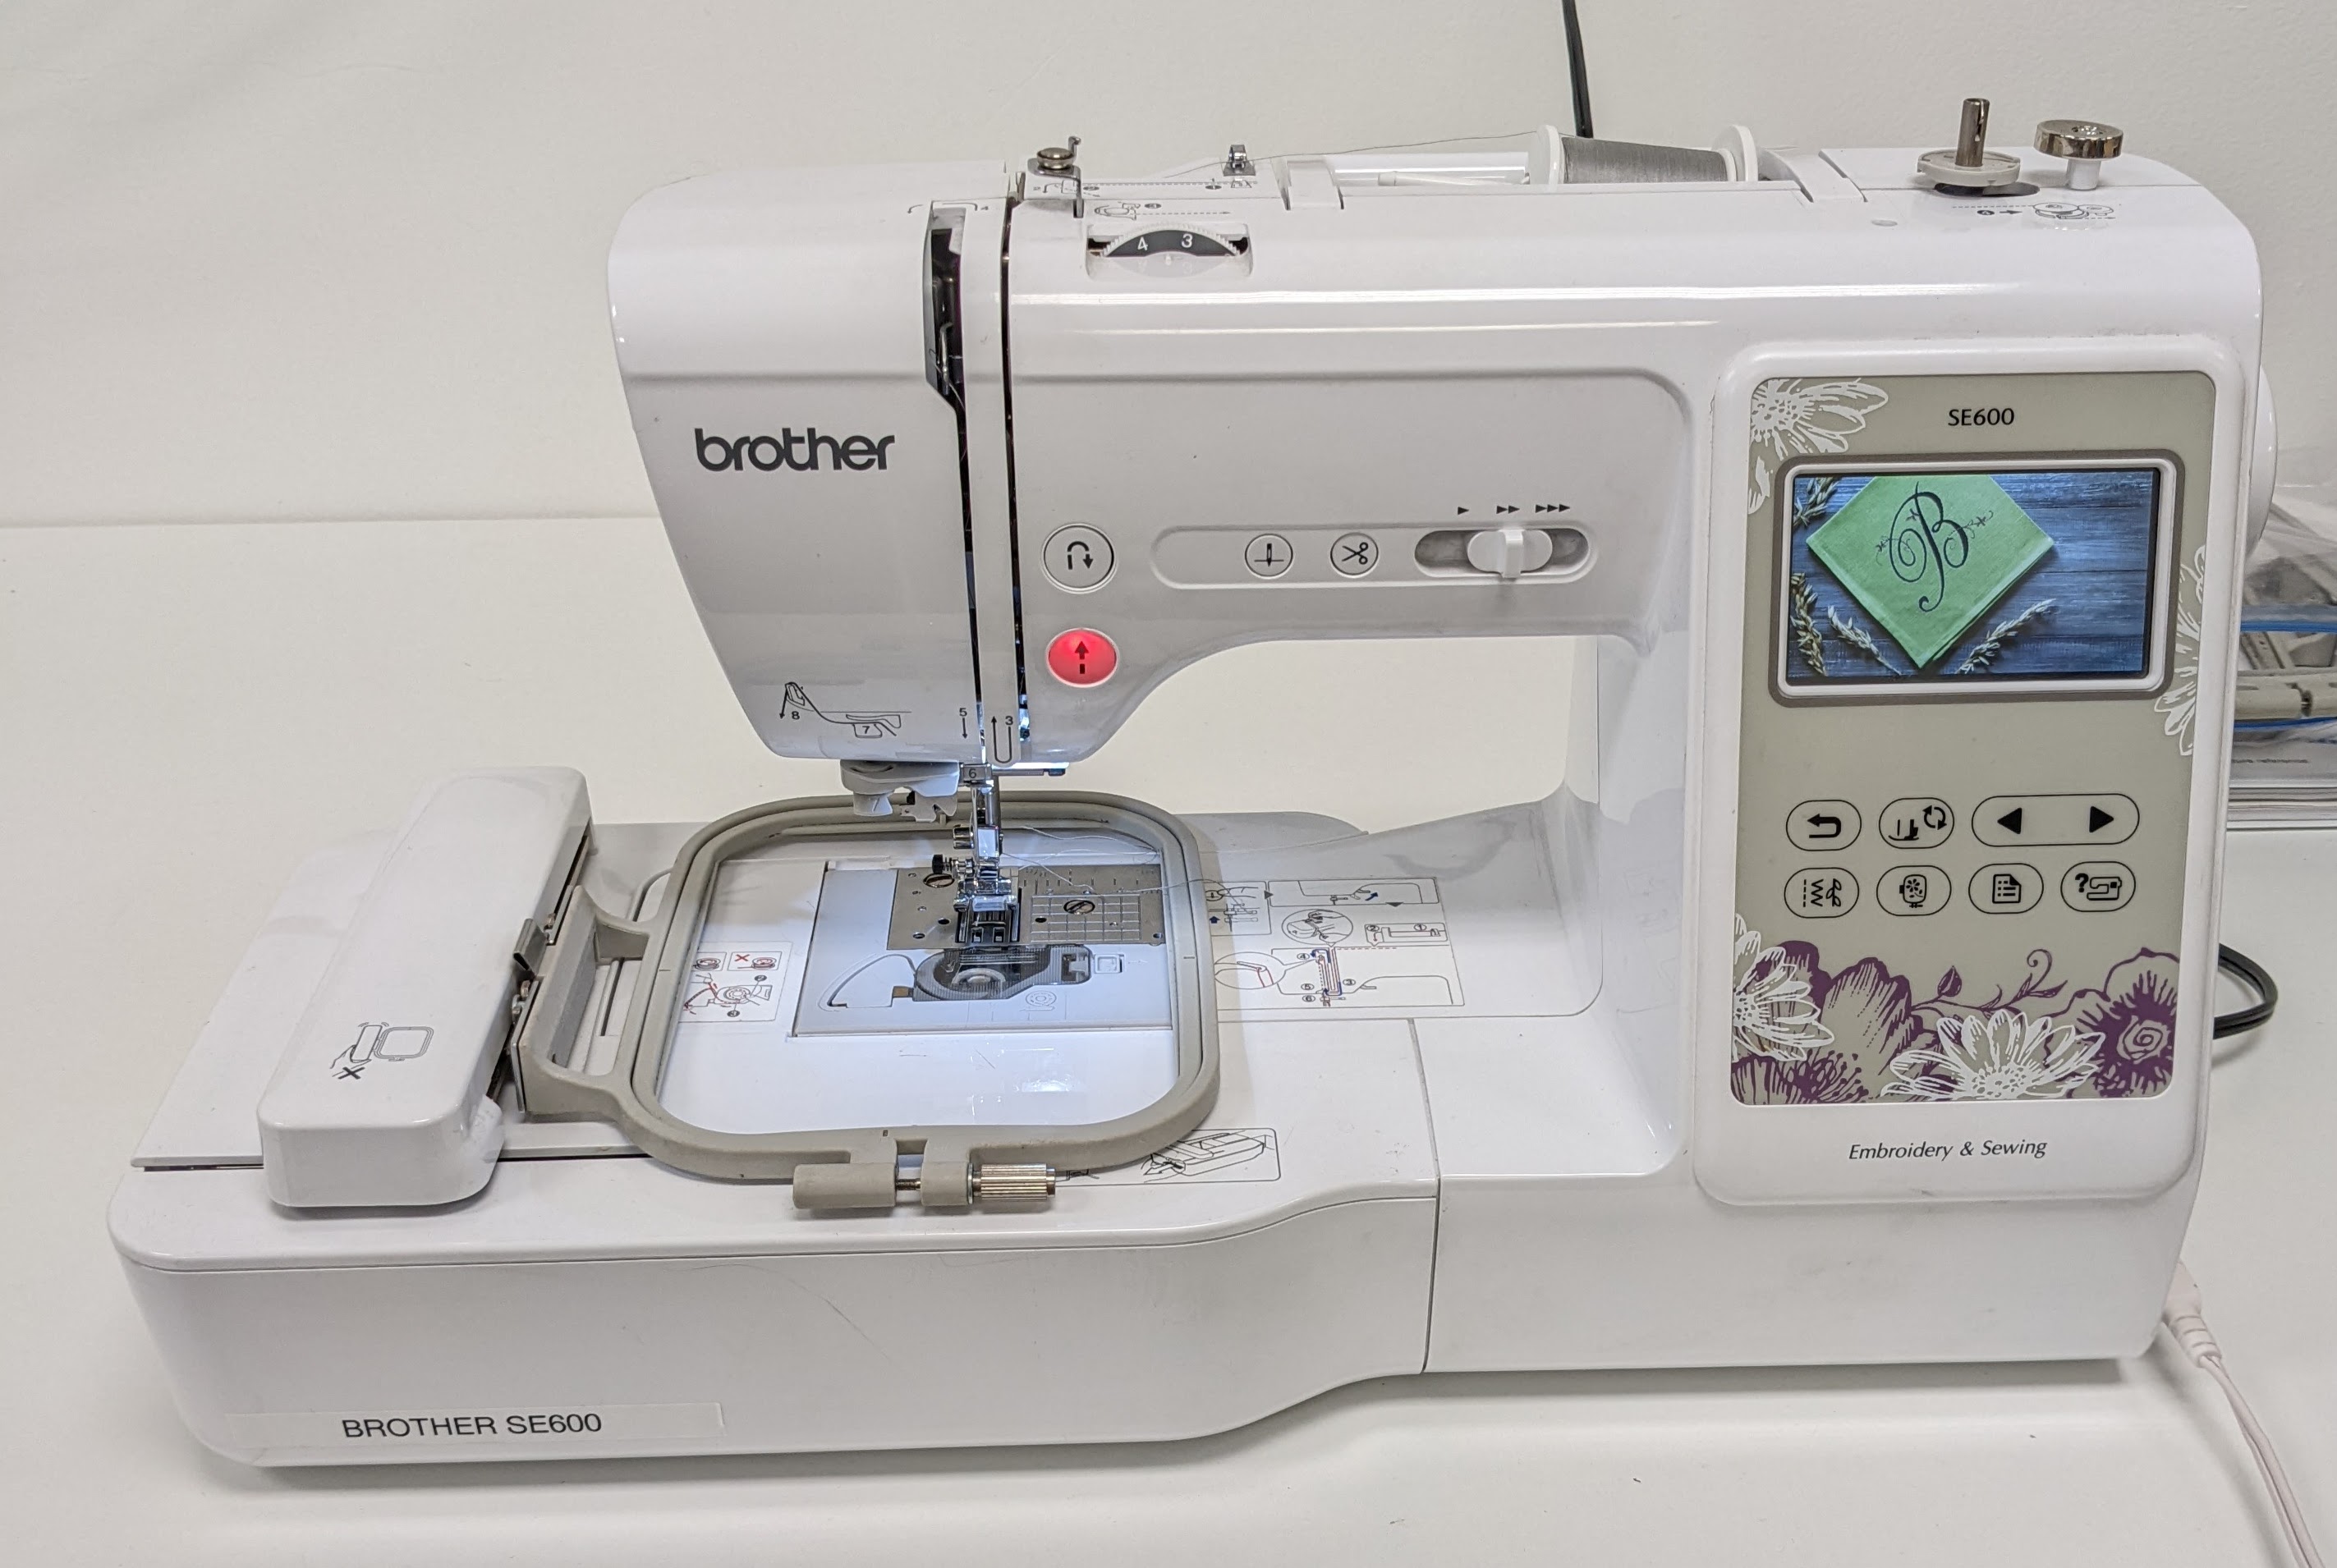 Brother SE600 embroidery.jpg